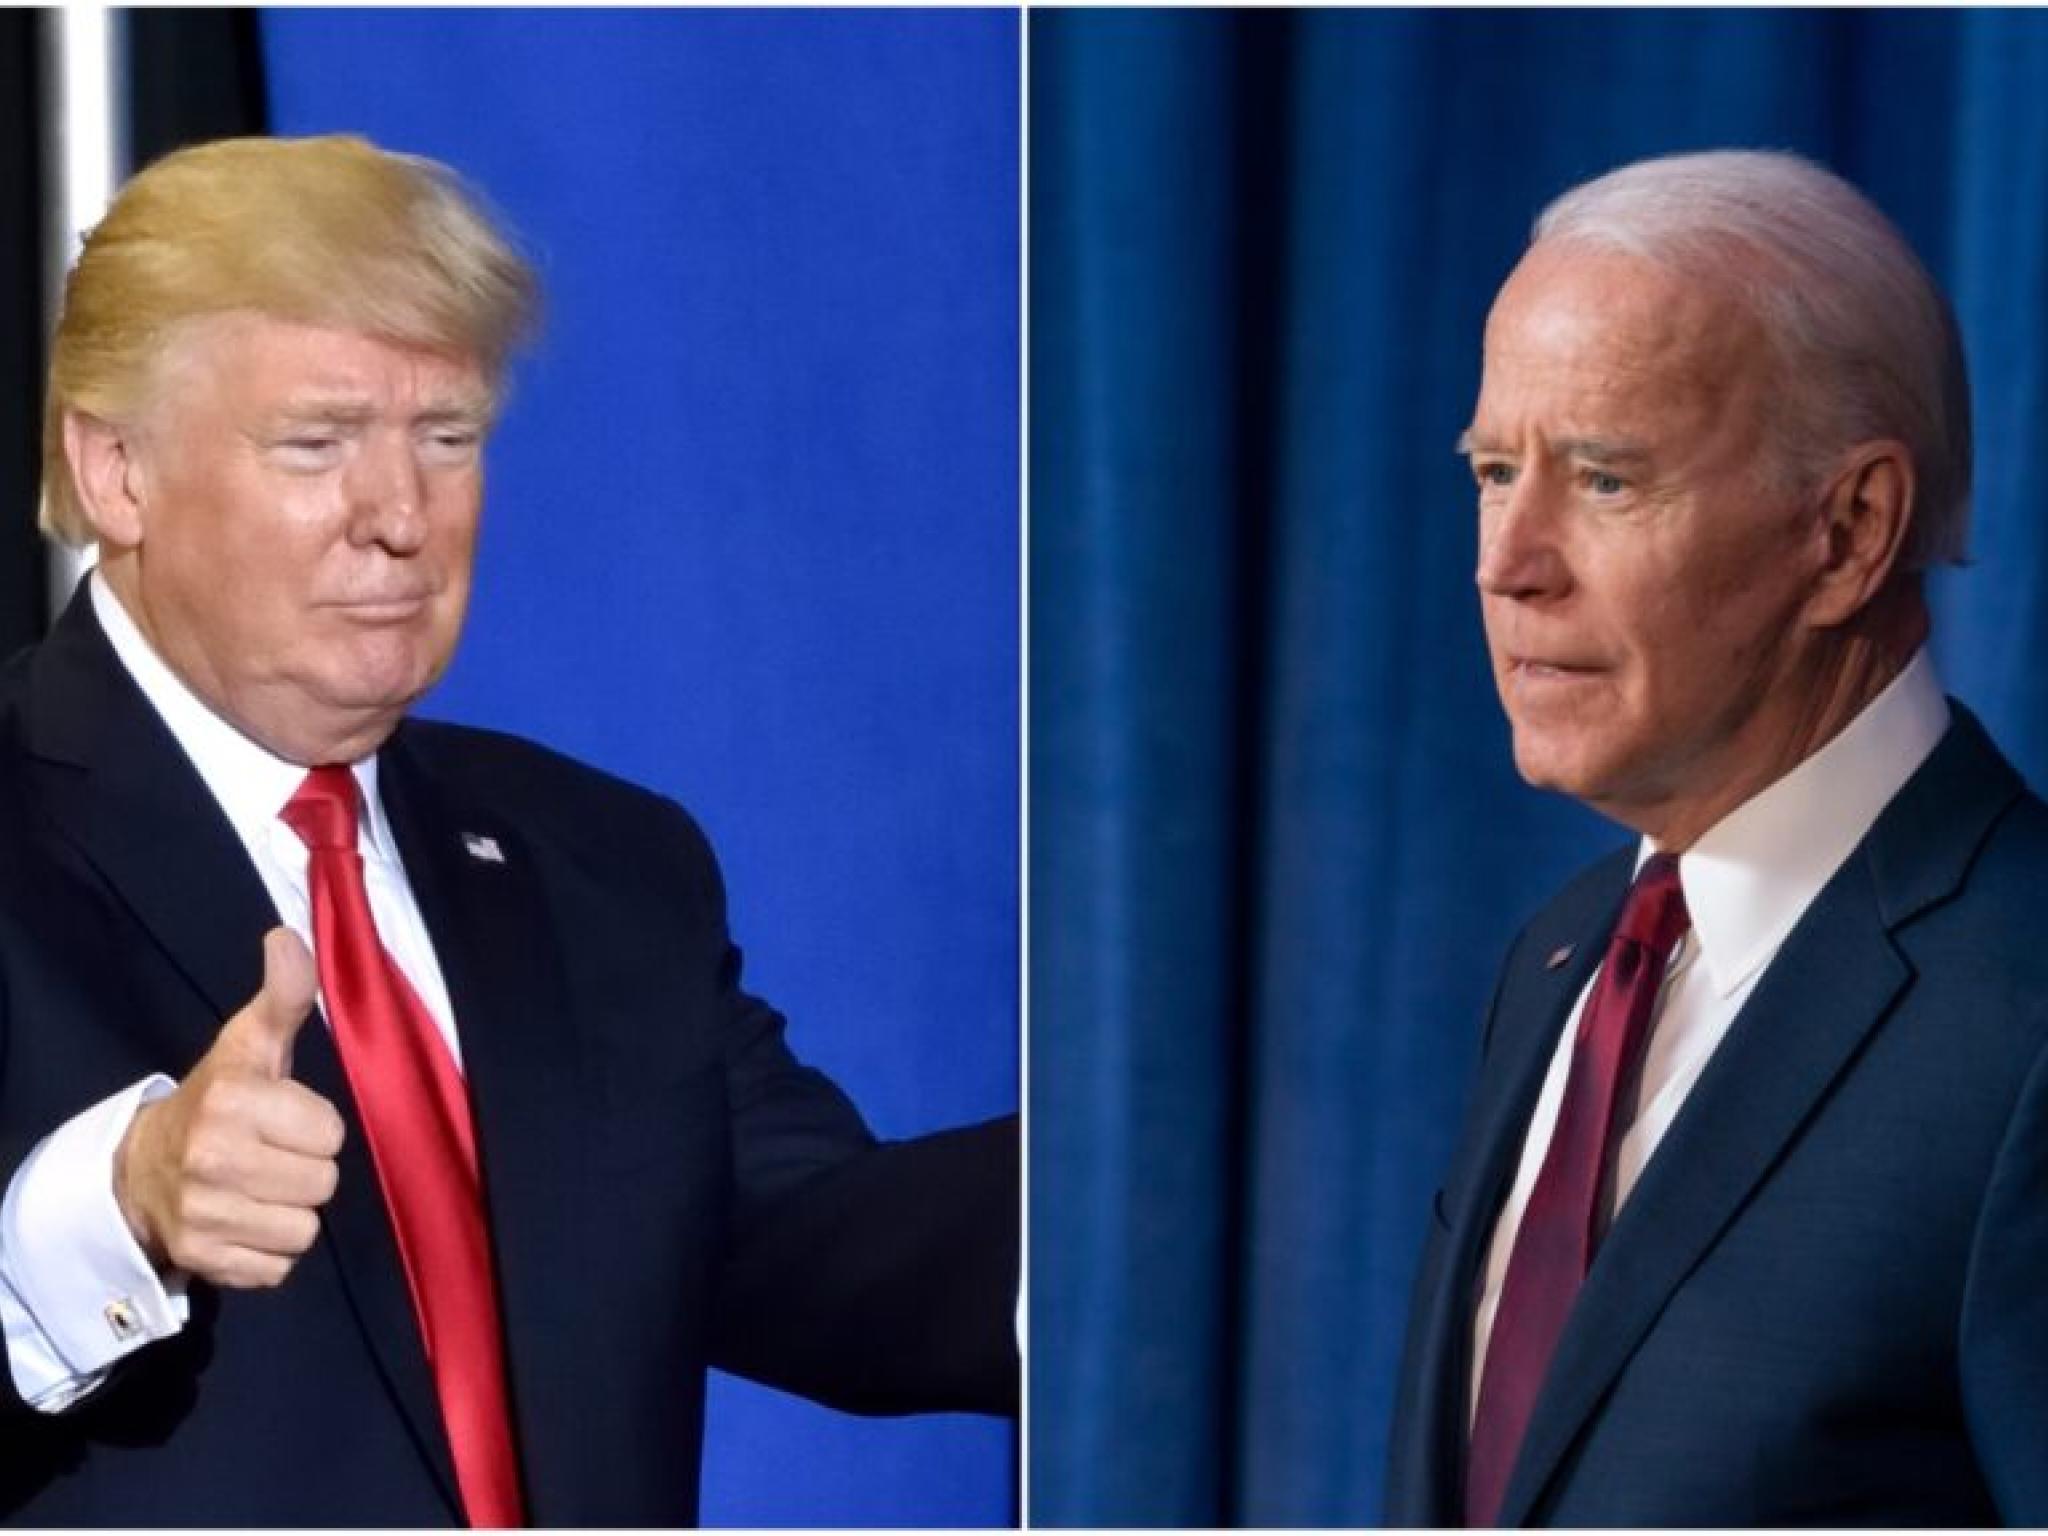  in-biden-vs-trump-voters-see-rematch-as-battle-of-democracy-and-economy-poll-finds-which-candidate-will-redeem-himself-in-thursdays-presidential-debate 